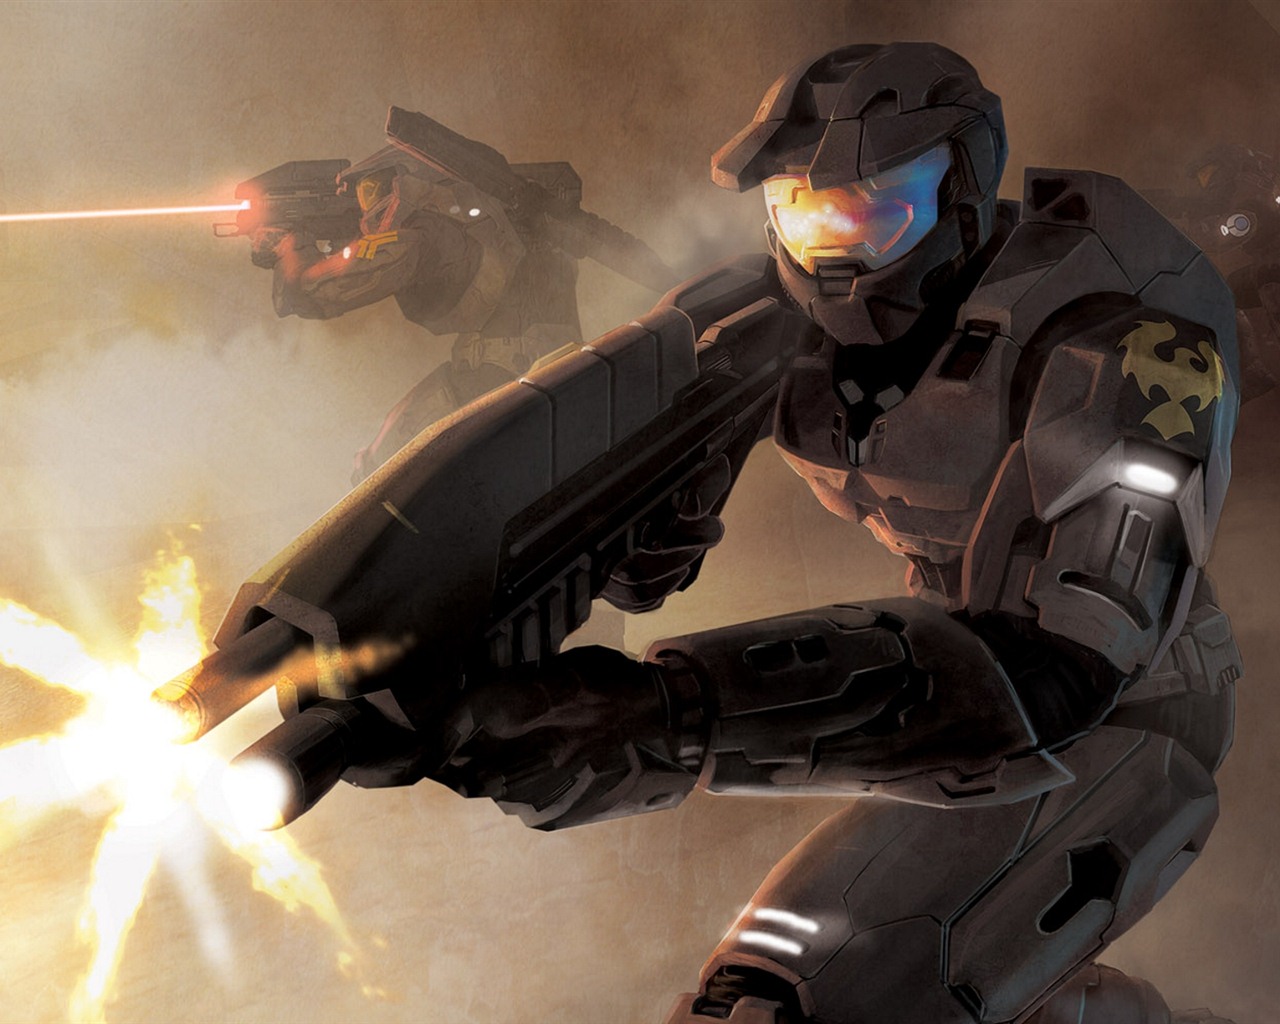 Halo game HD wallpapers #10 - 1280x1024